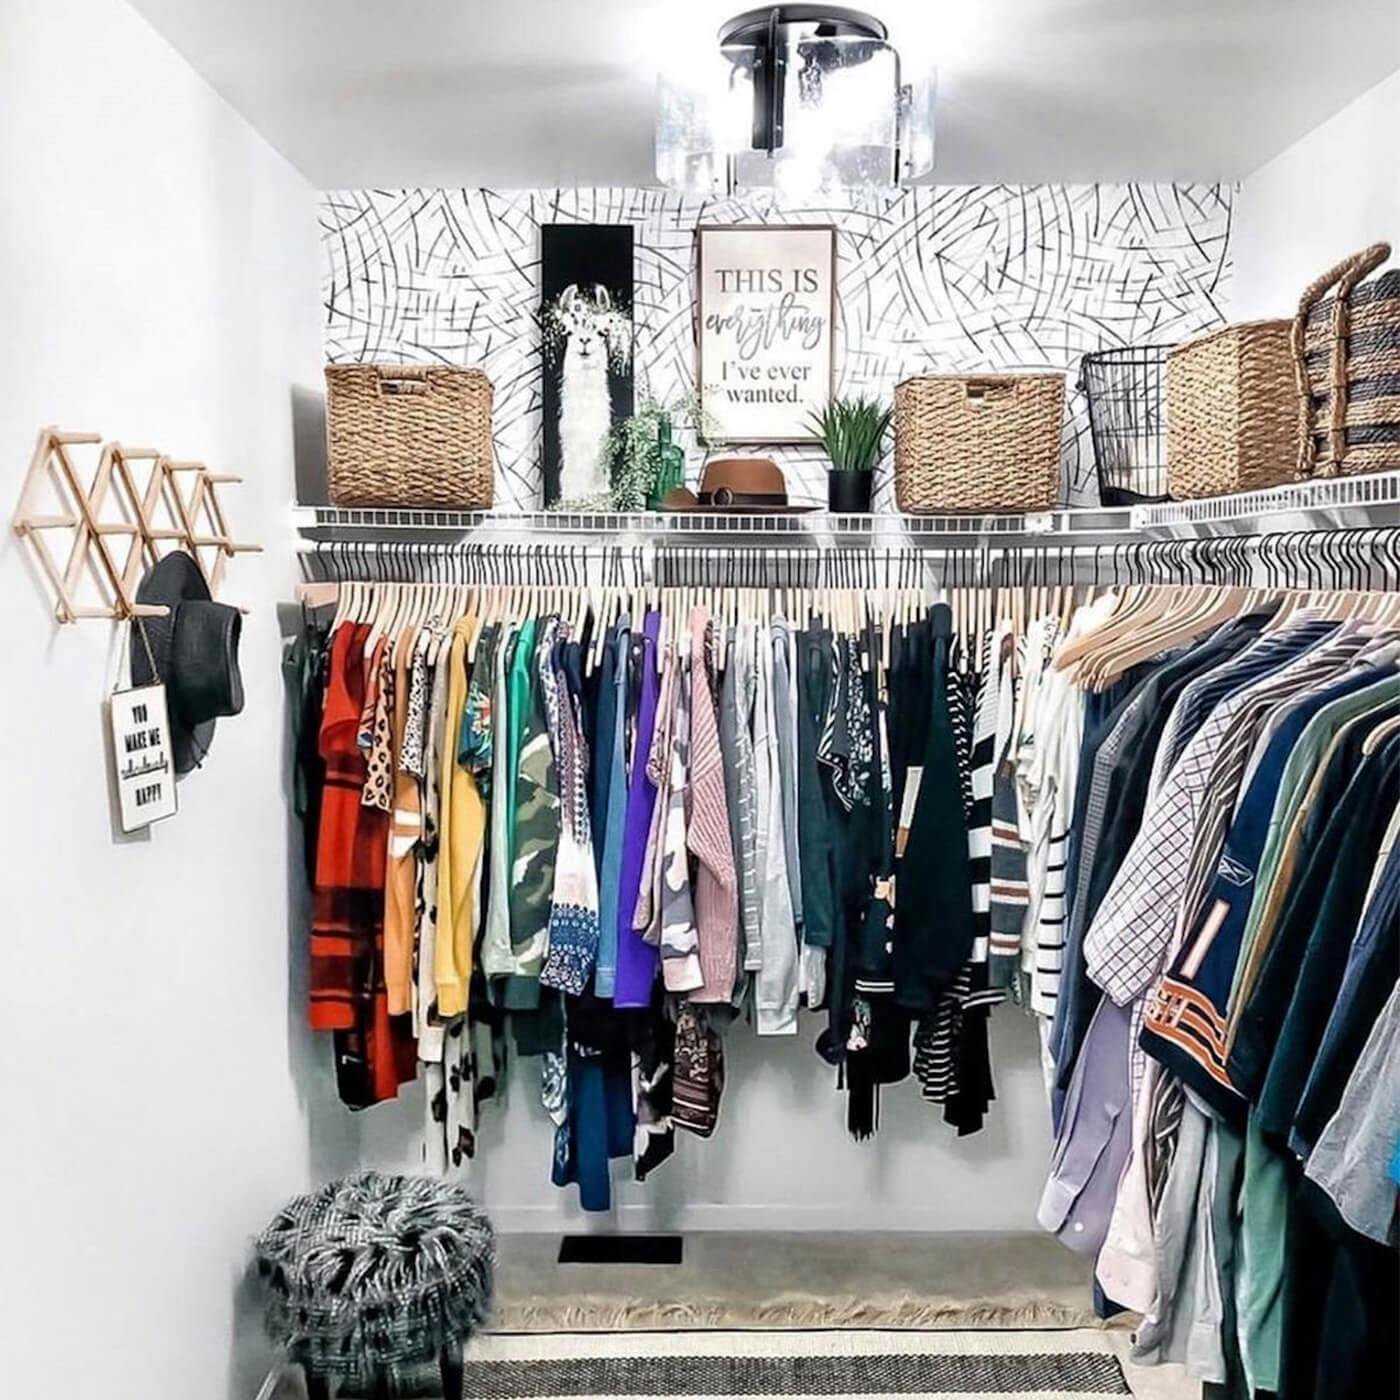 Instagram photo of a walk-in closet with bright lighting